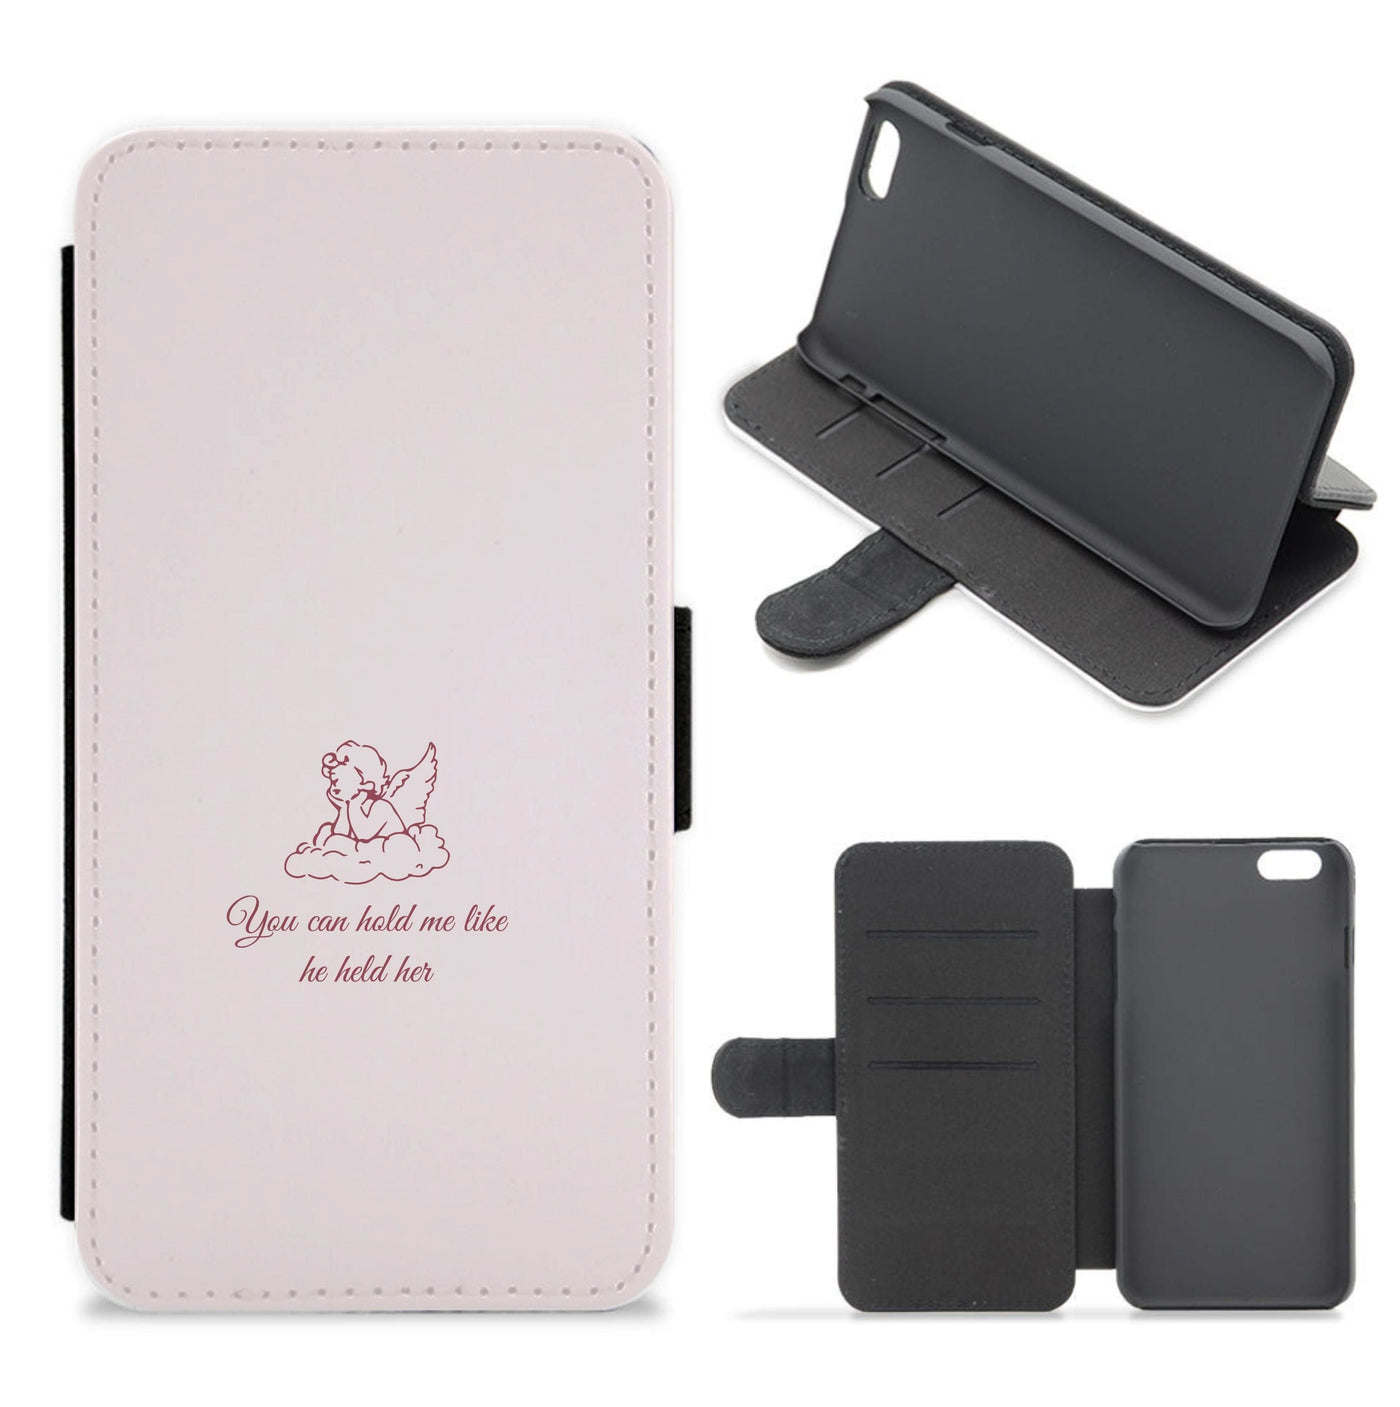 You Can Hold Me Like He Held Her - Festival Flip / Wallet Phone Case